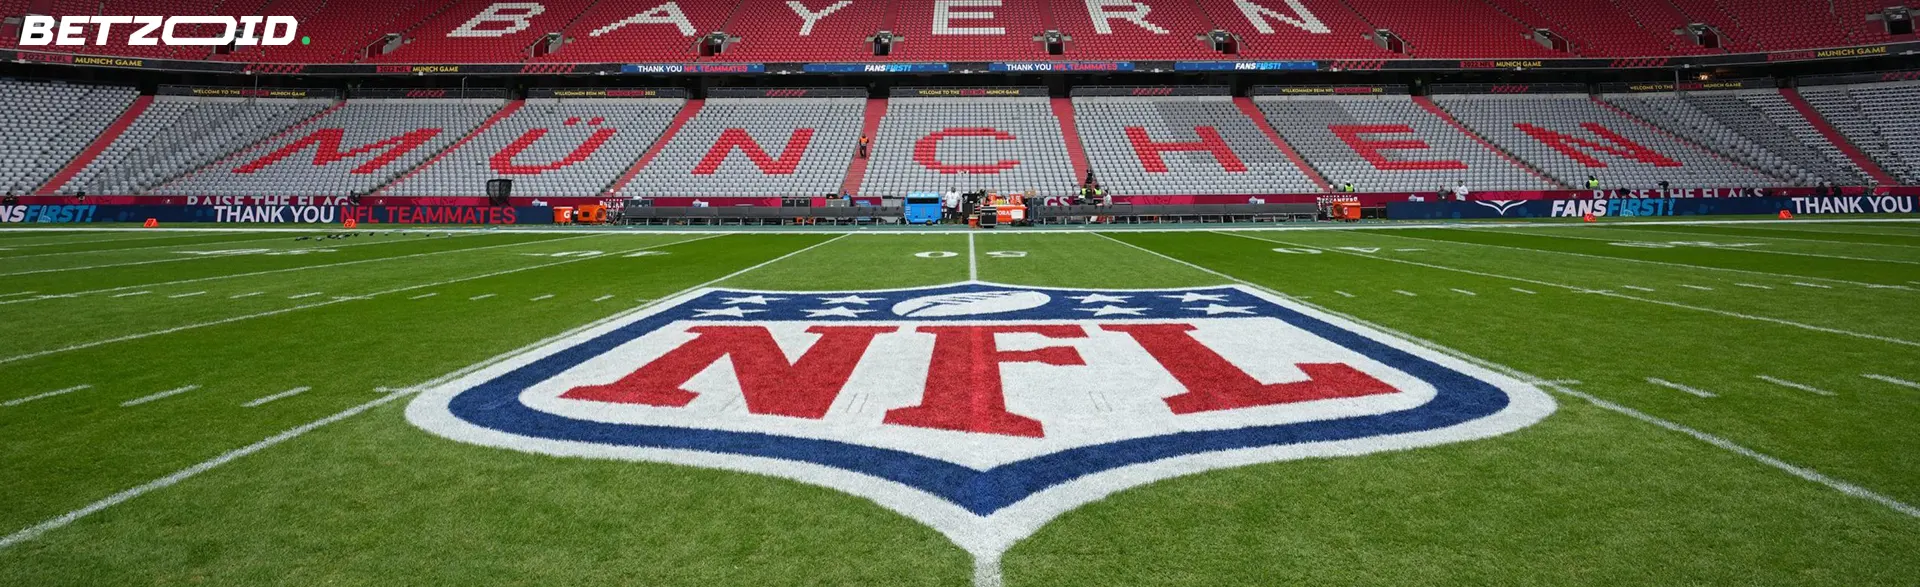 NFL field with a prominent logo at Bayern Munich stadium, highlighting the best online betting site for football in Canada.